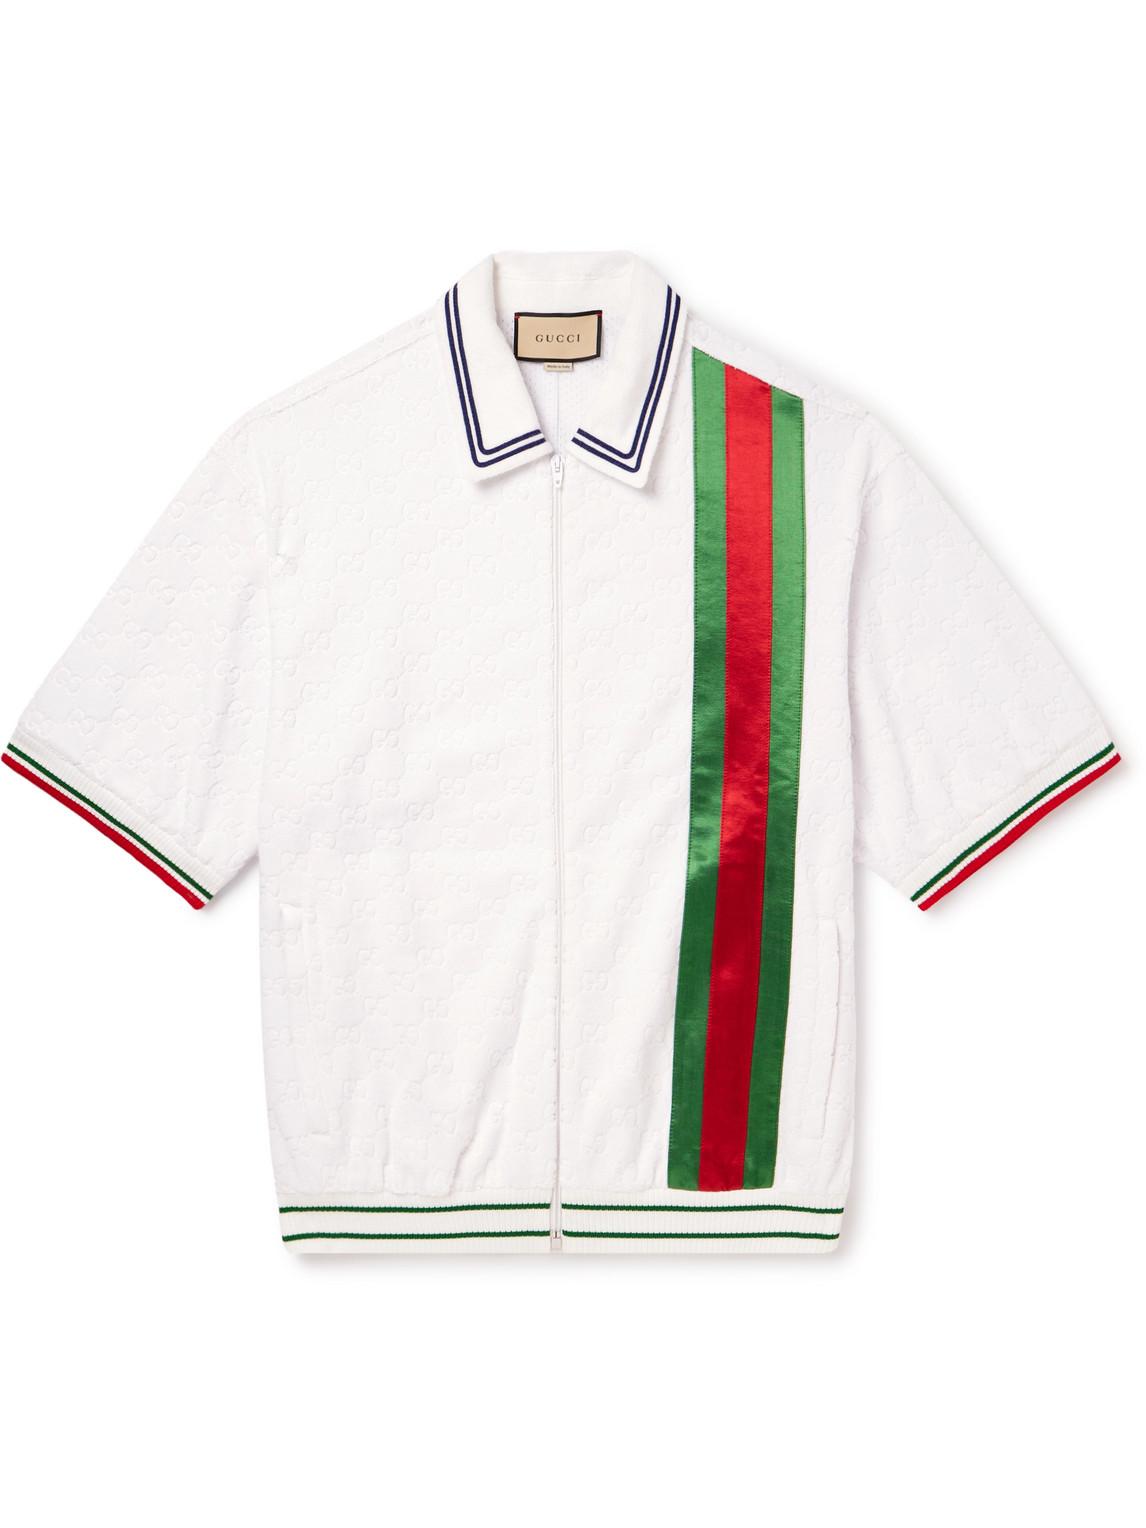 Gucci Jacquard Sponge Polo Shirt in for Men Lyst